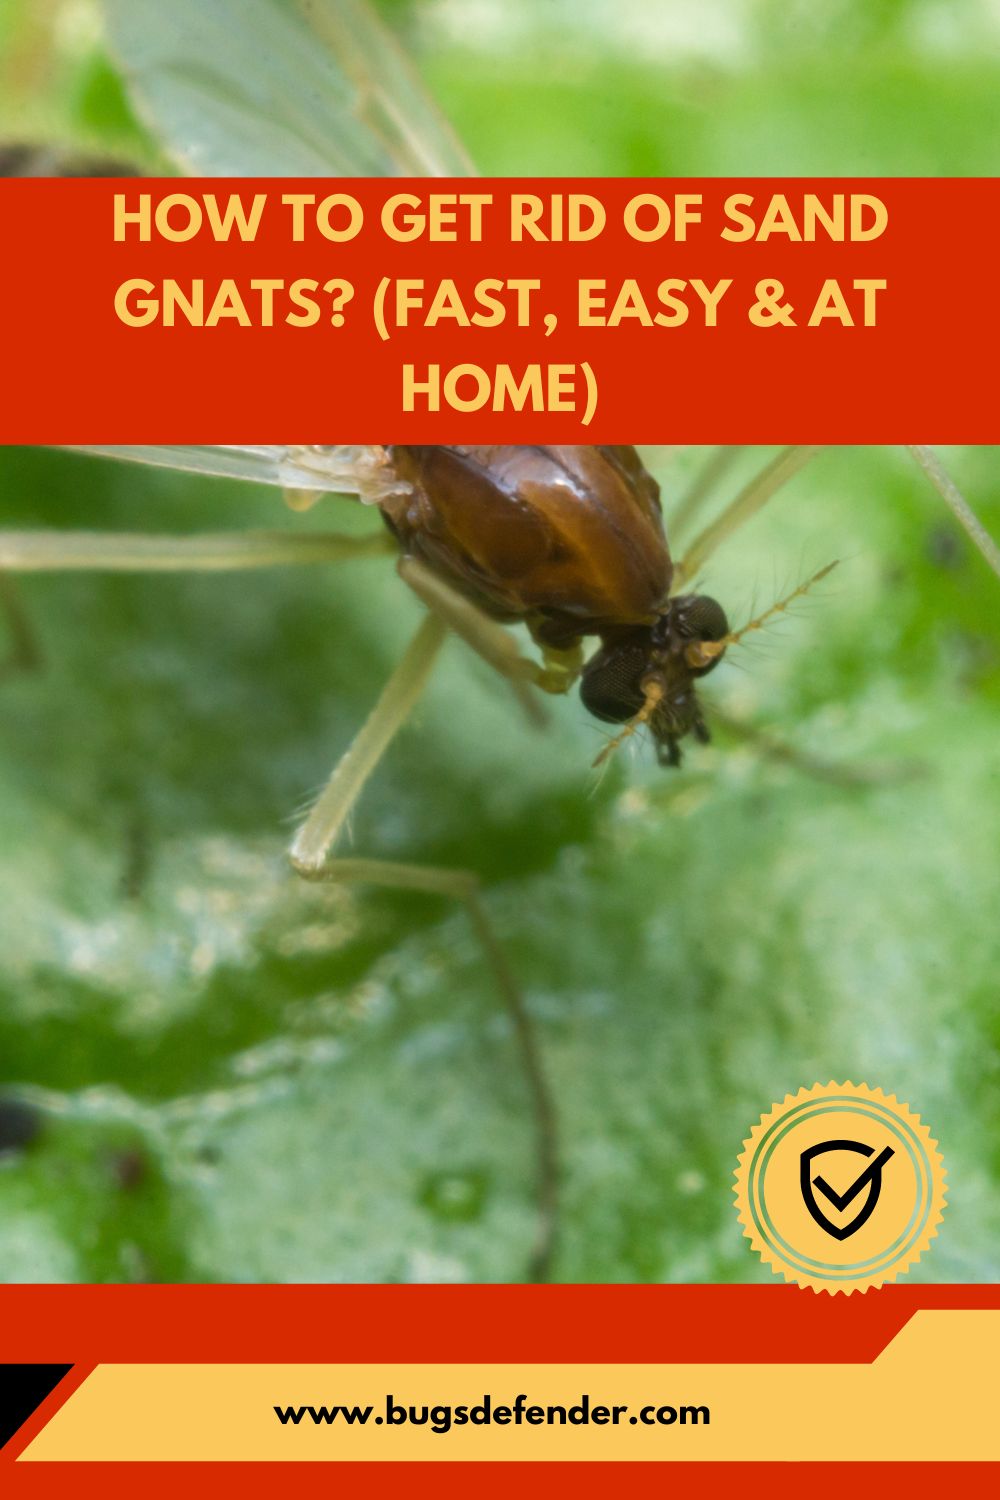 How To Get Rid Of Sand Gnats pin2